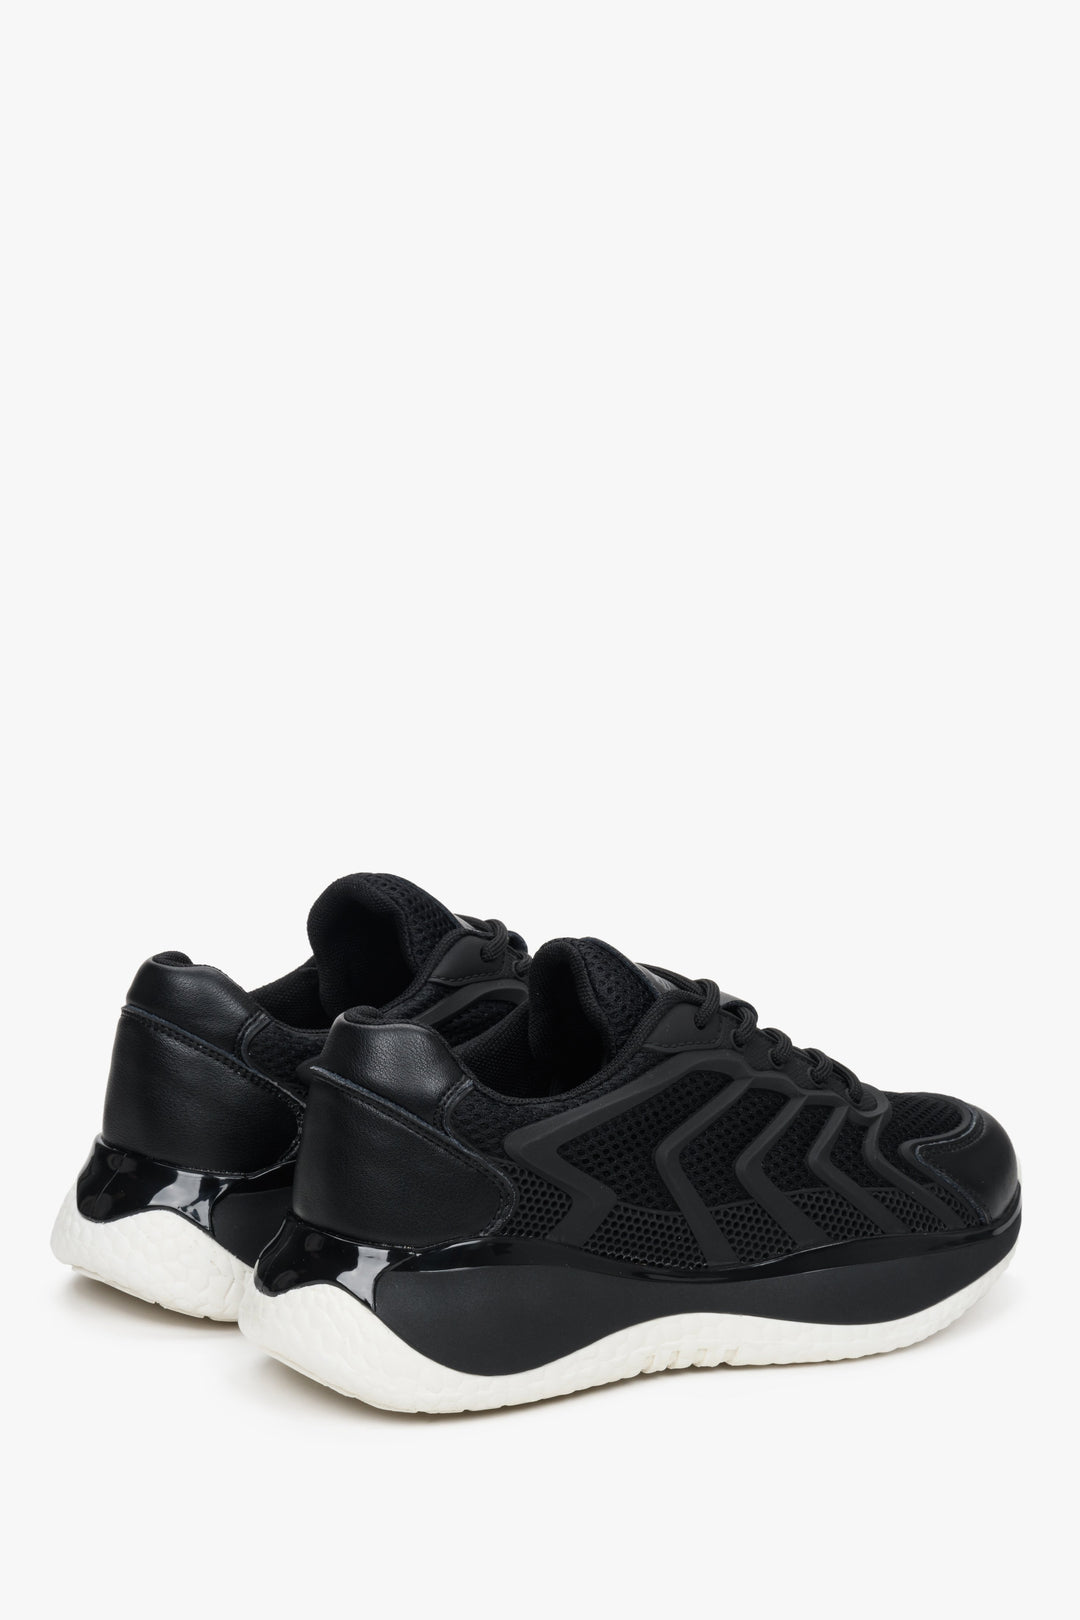 Women's black sneakers with a chunky white sole by ES 8.